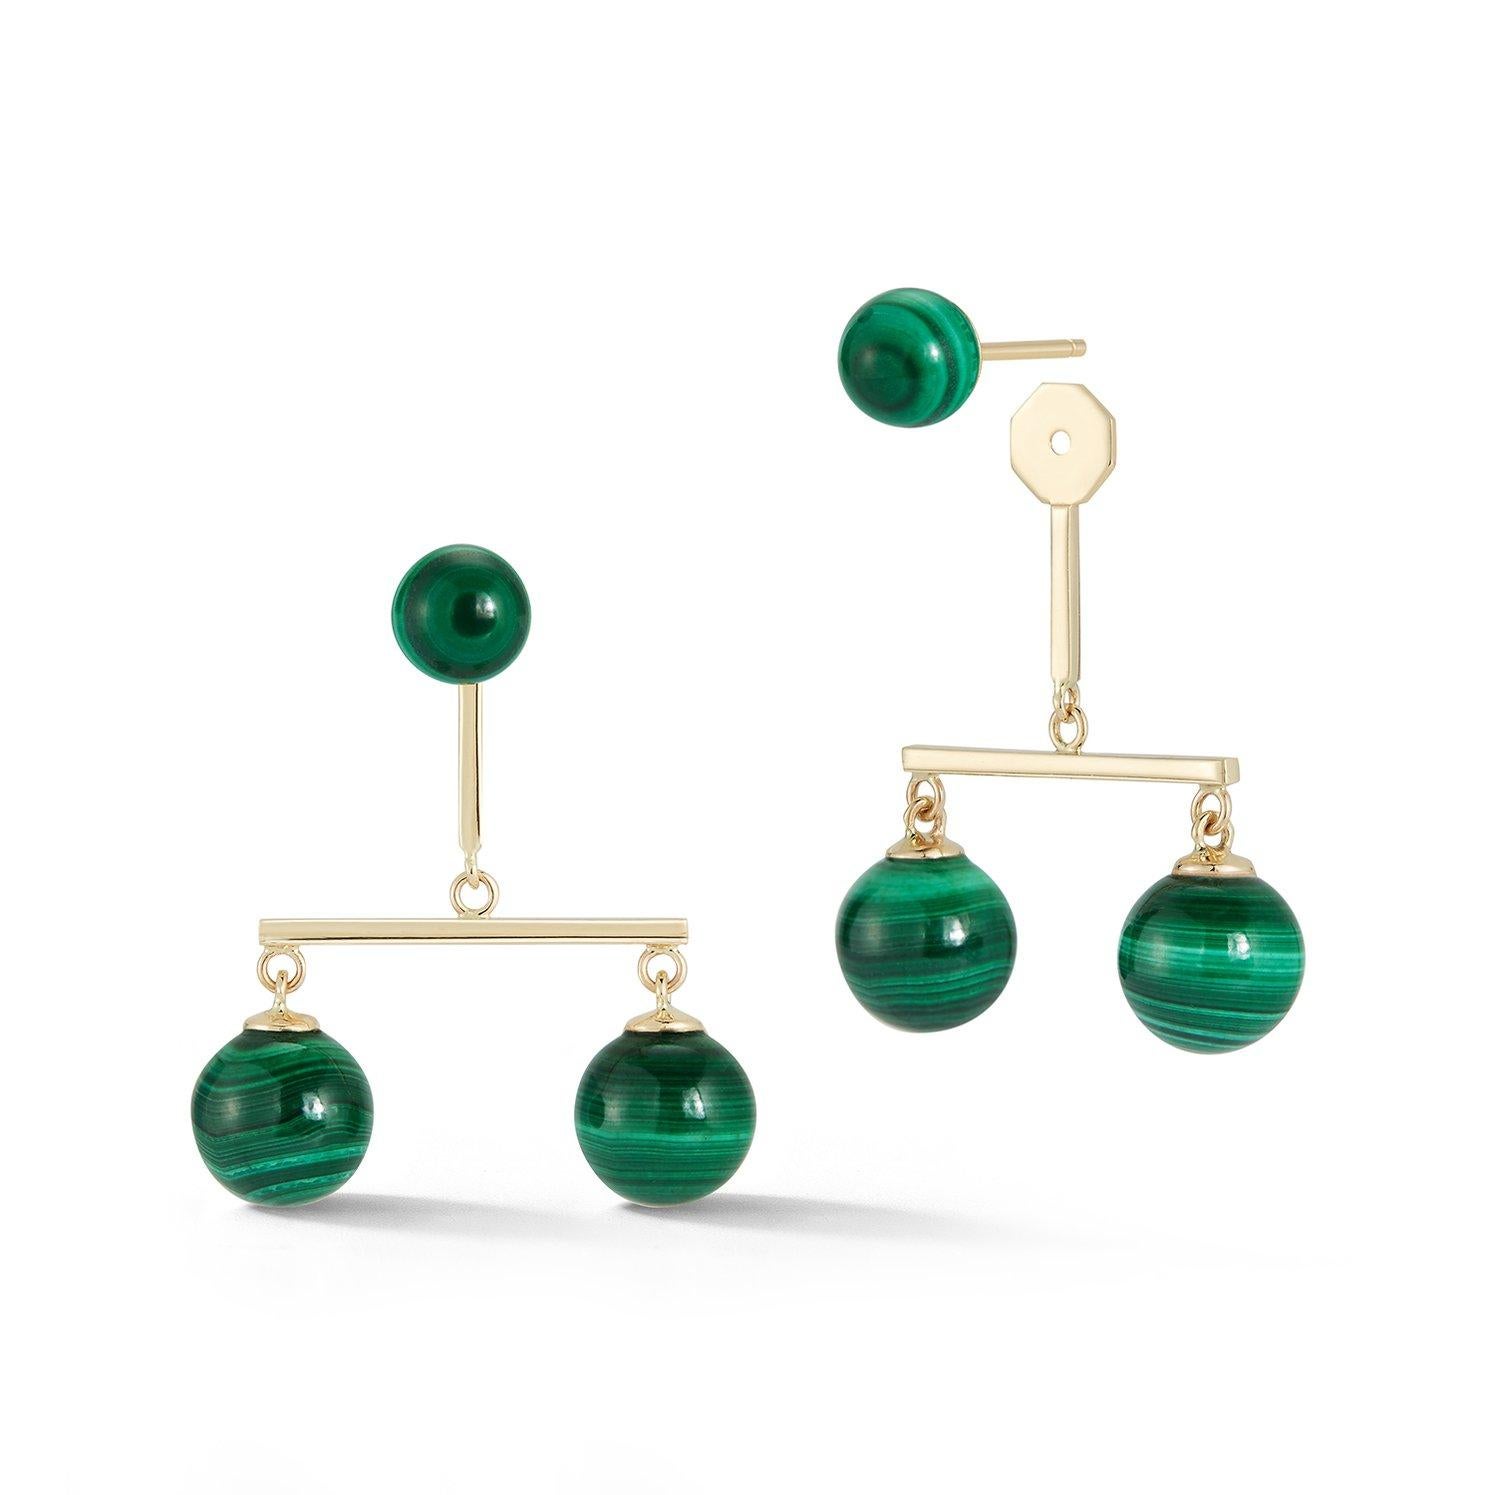 Beautifully made in New York of solid 14kt gold and vibrant malachite. These earrings are truly a work of art. Mateo draws inspiration from the artist Alexander Calder. Earring can be worn as a total set or just as a malachite stud. 